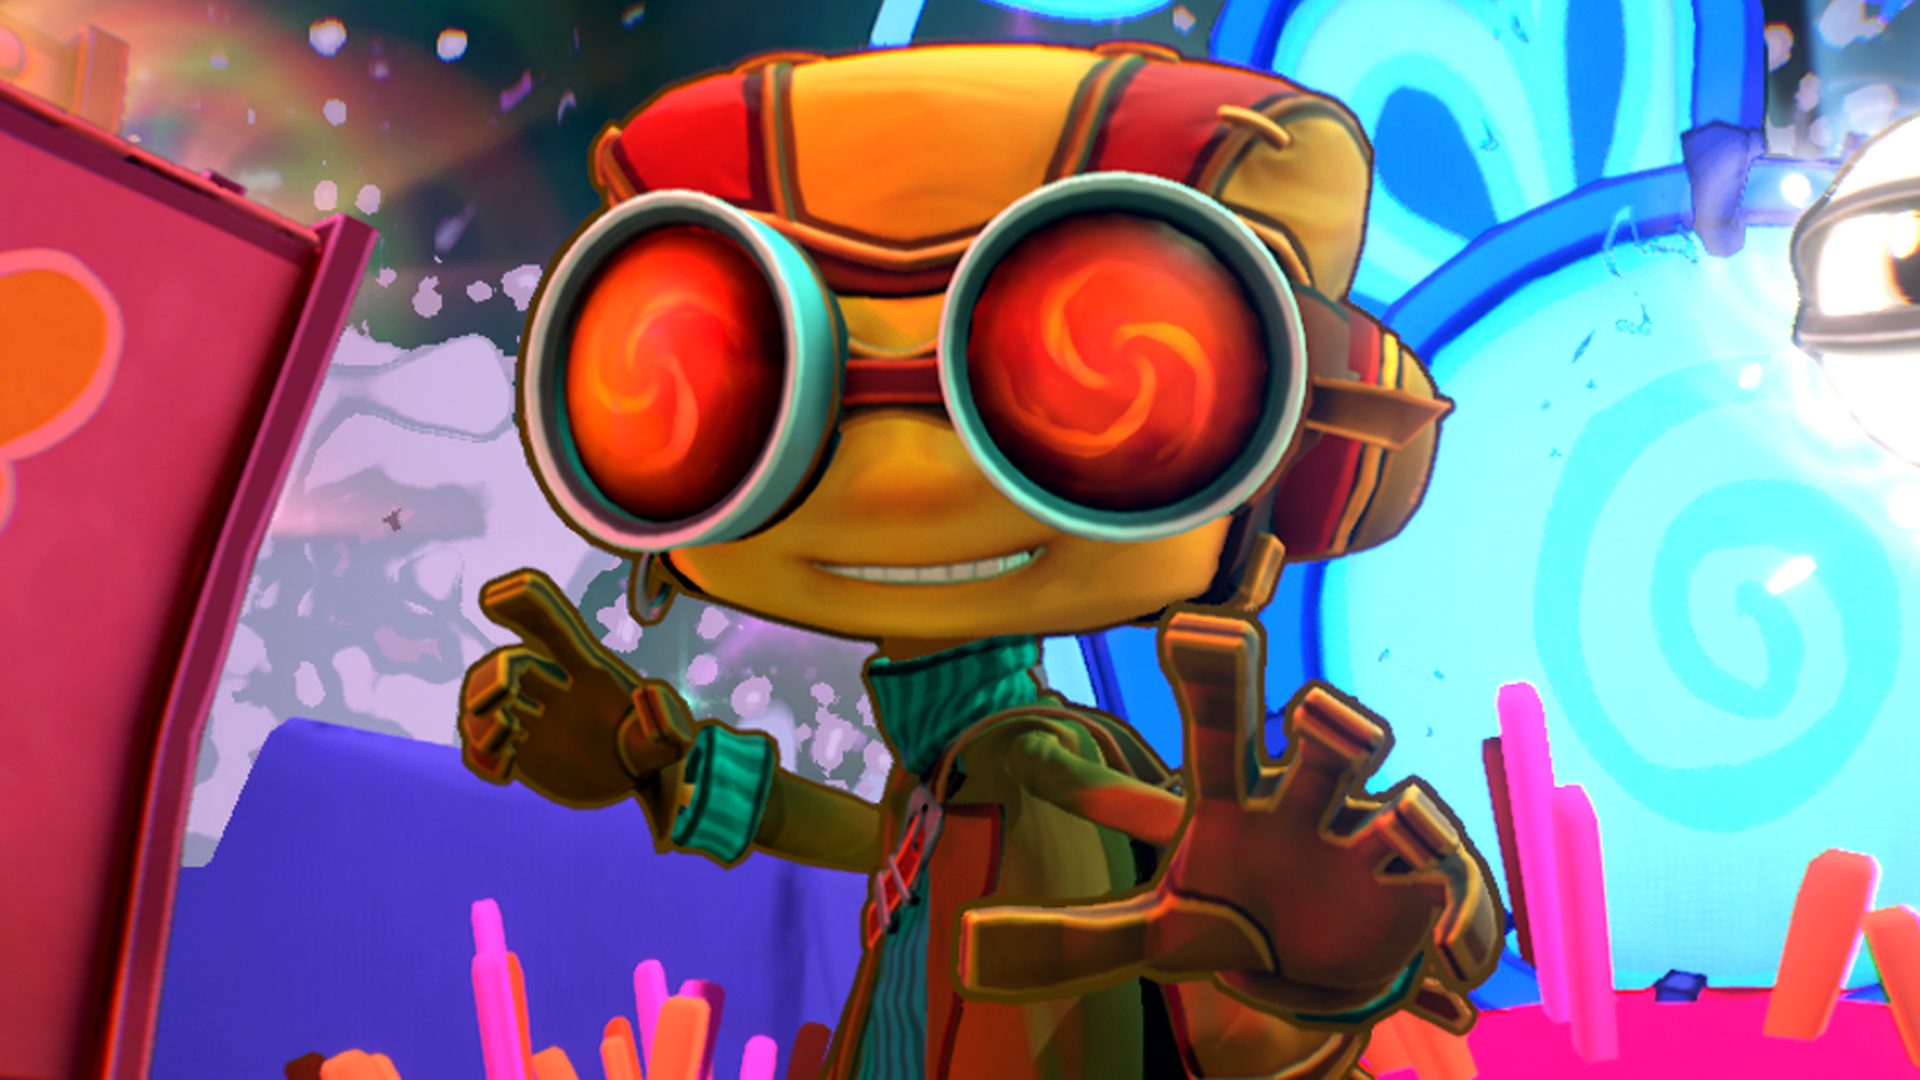 Psychonauts 2 has become the best-selling Double Fine game